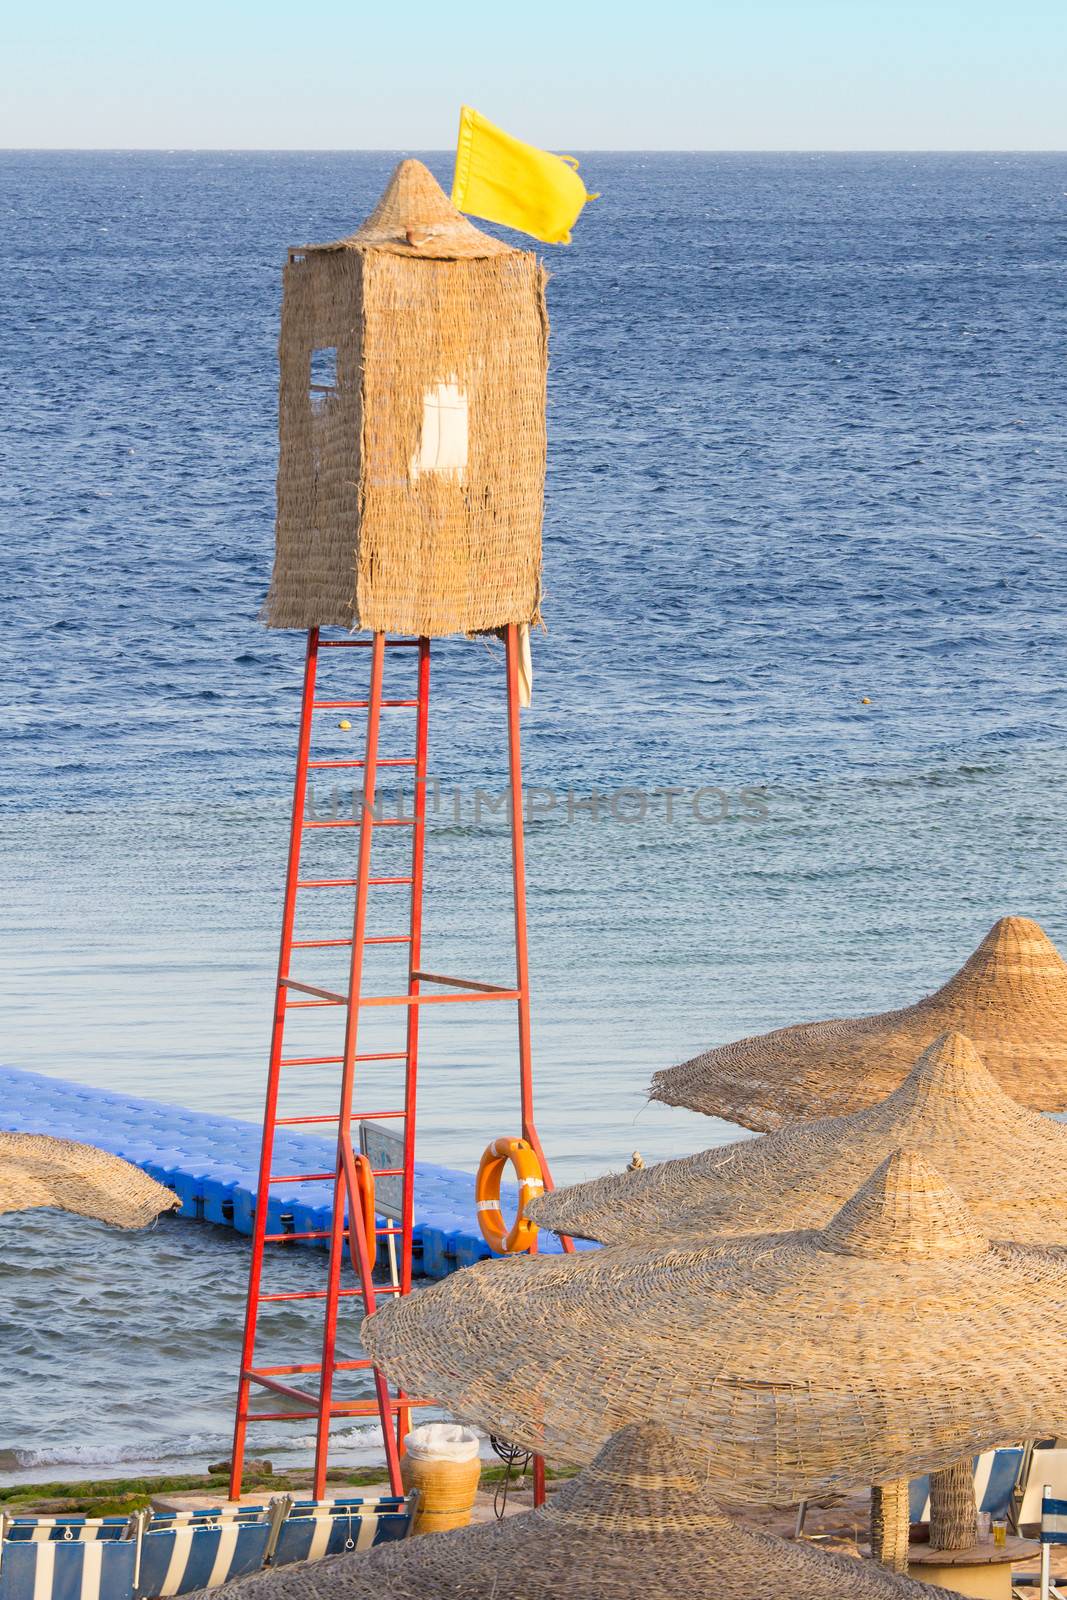 A wicker lifeguard watchtower or lookout tower and yellow flag on a beach.